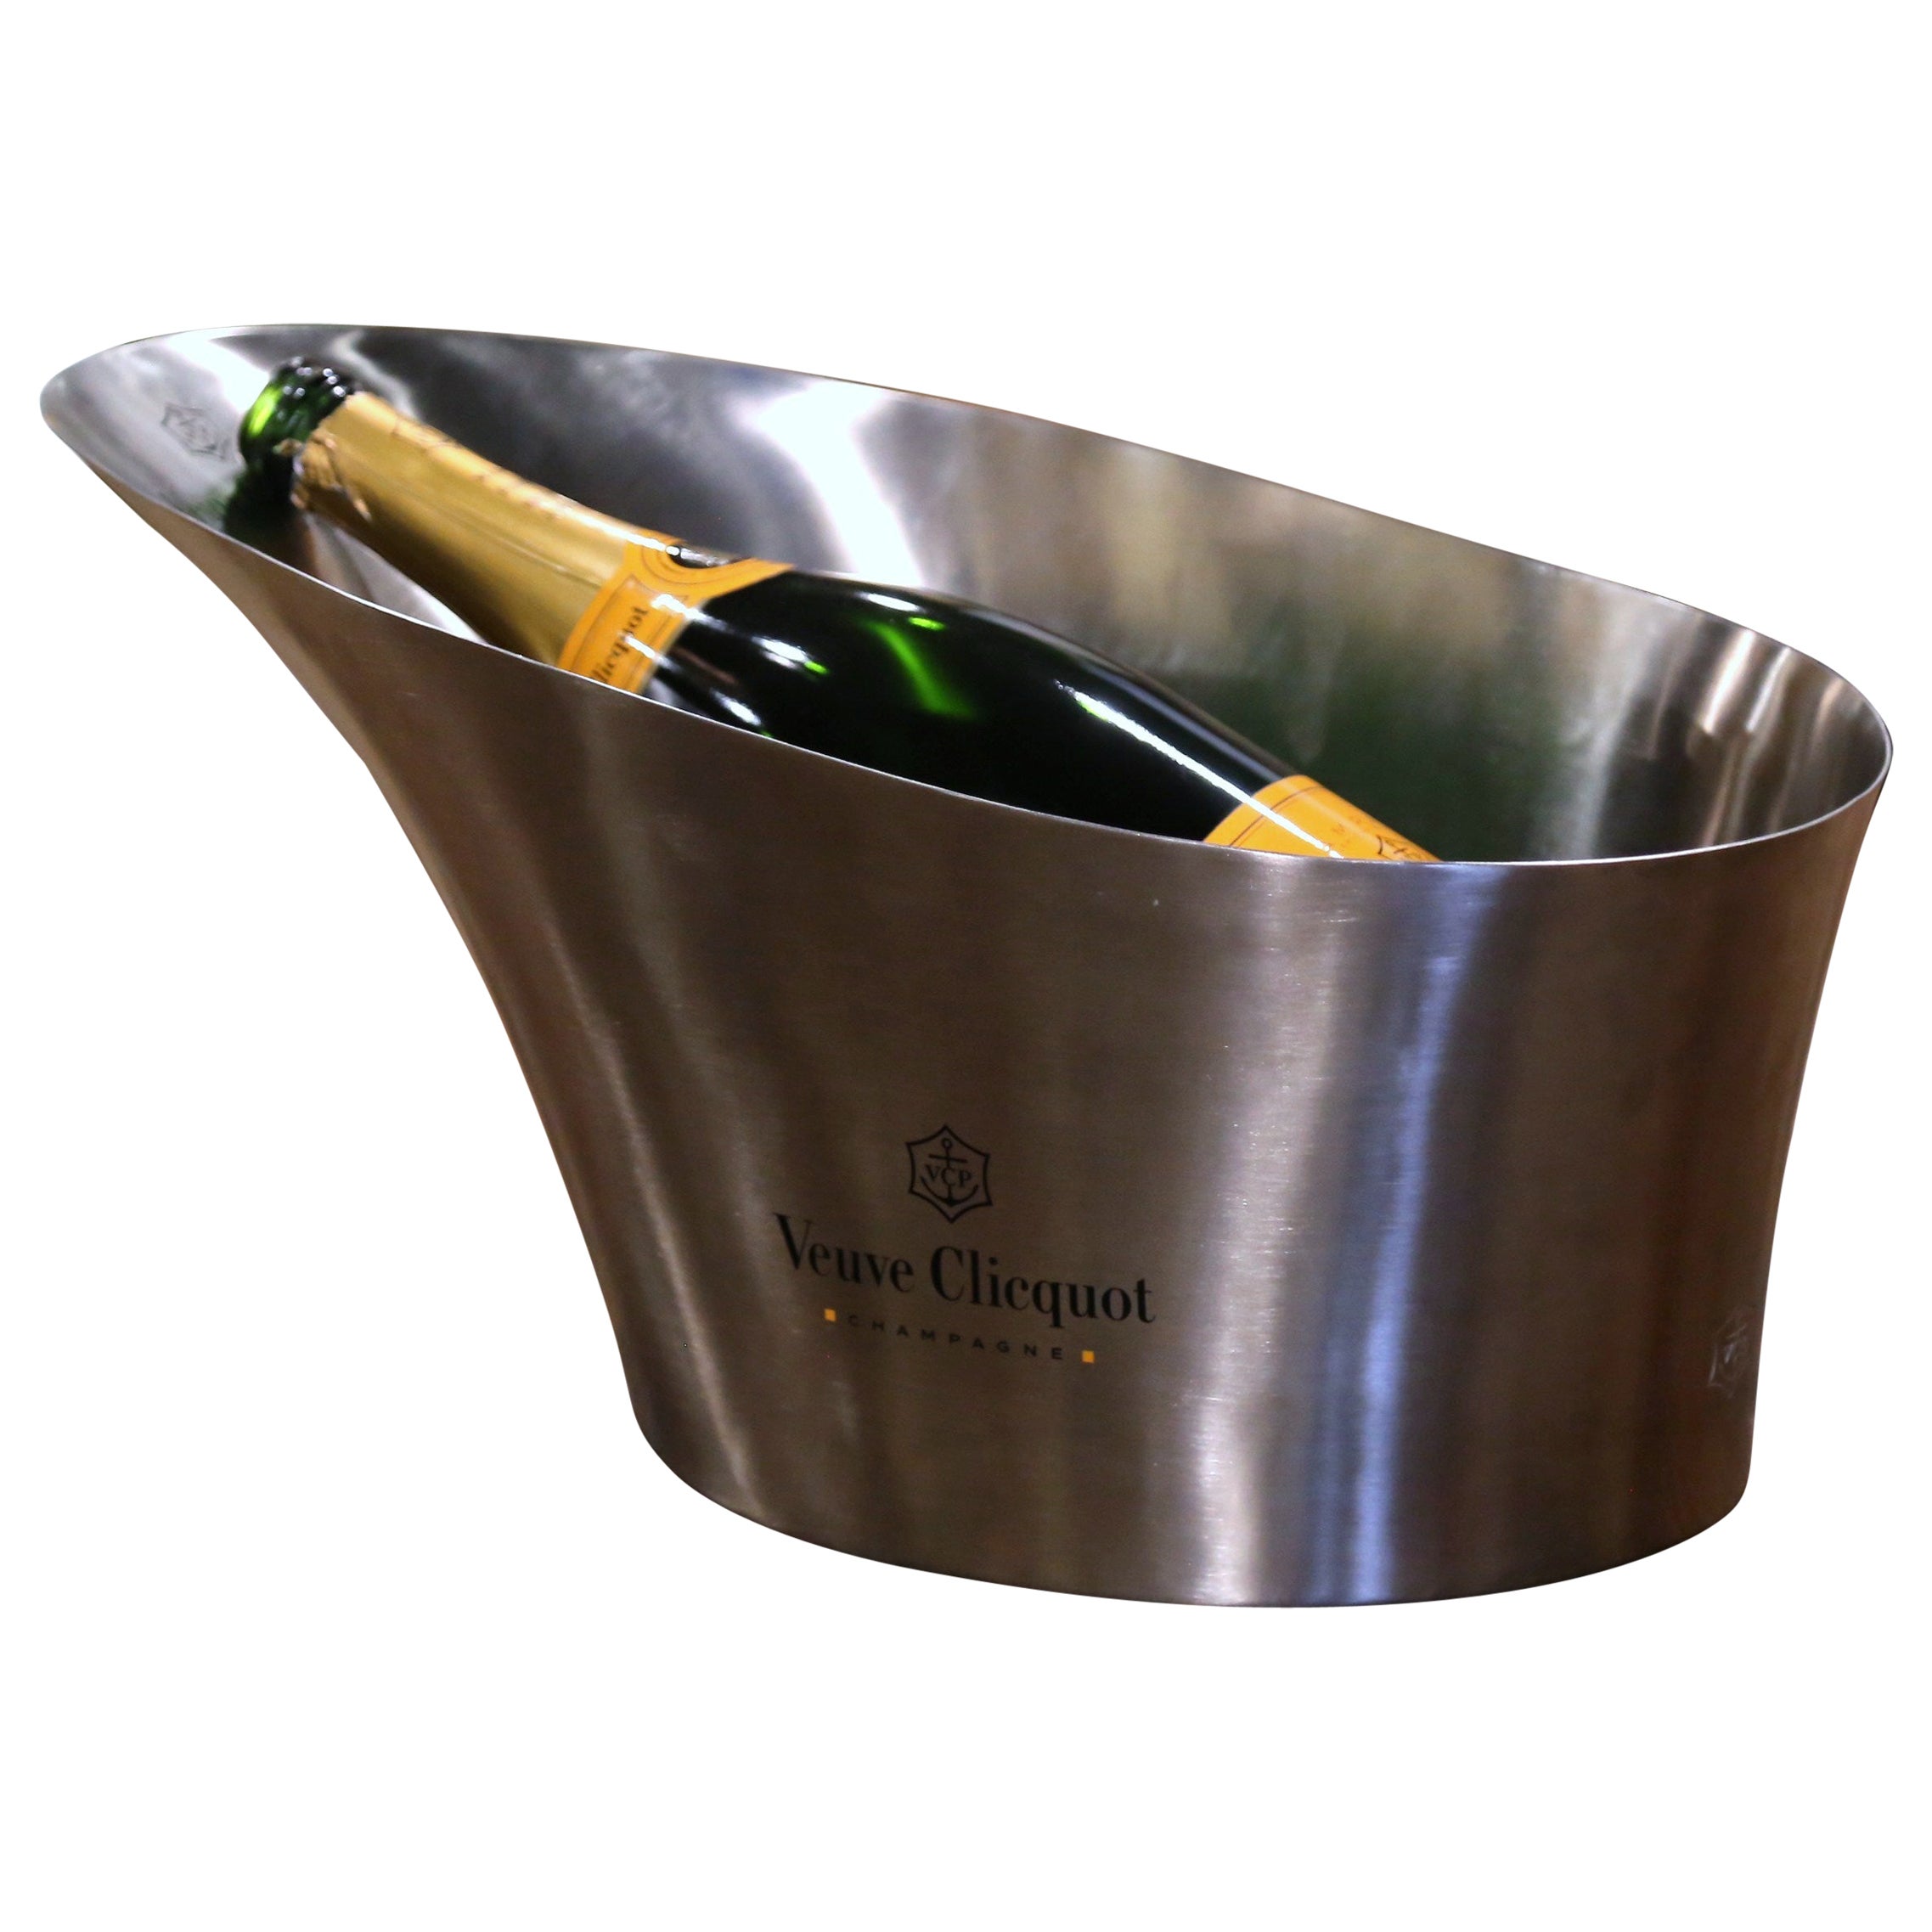 Vintage French Stainless Steel "Veuve Clicquot" Double Magnum Champagne Cooler For Sale